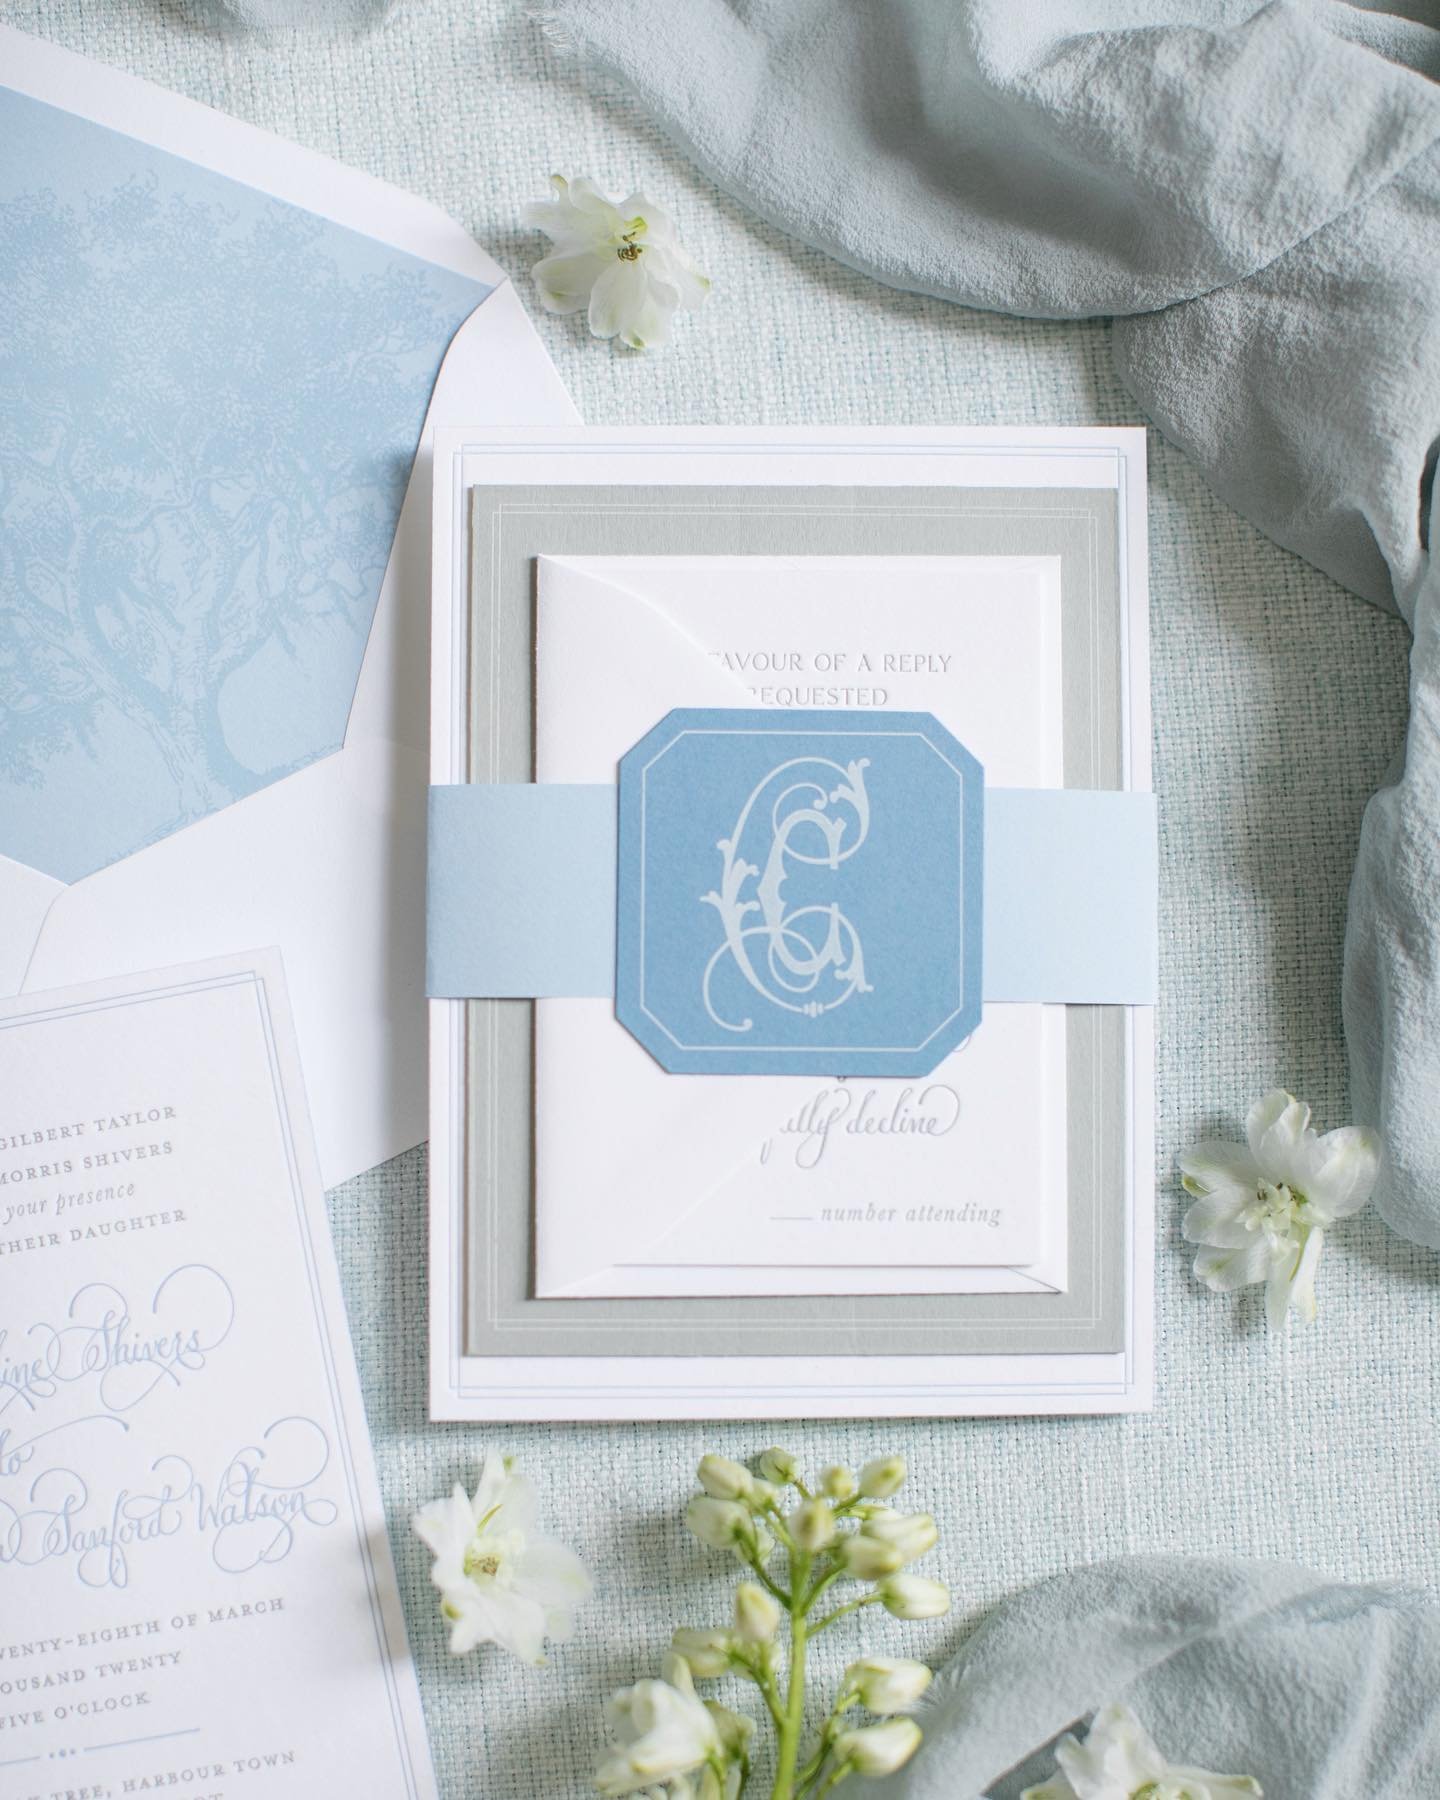 This chic, two color letterpress invitation suite will always be a southern classic 💙 Swipe to see the full suite along with all the details and day of items from Caroline and Cameron&rsquo;s wedding day!

#karaanne_paper #luxurywedding #luxuryweddi